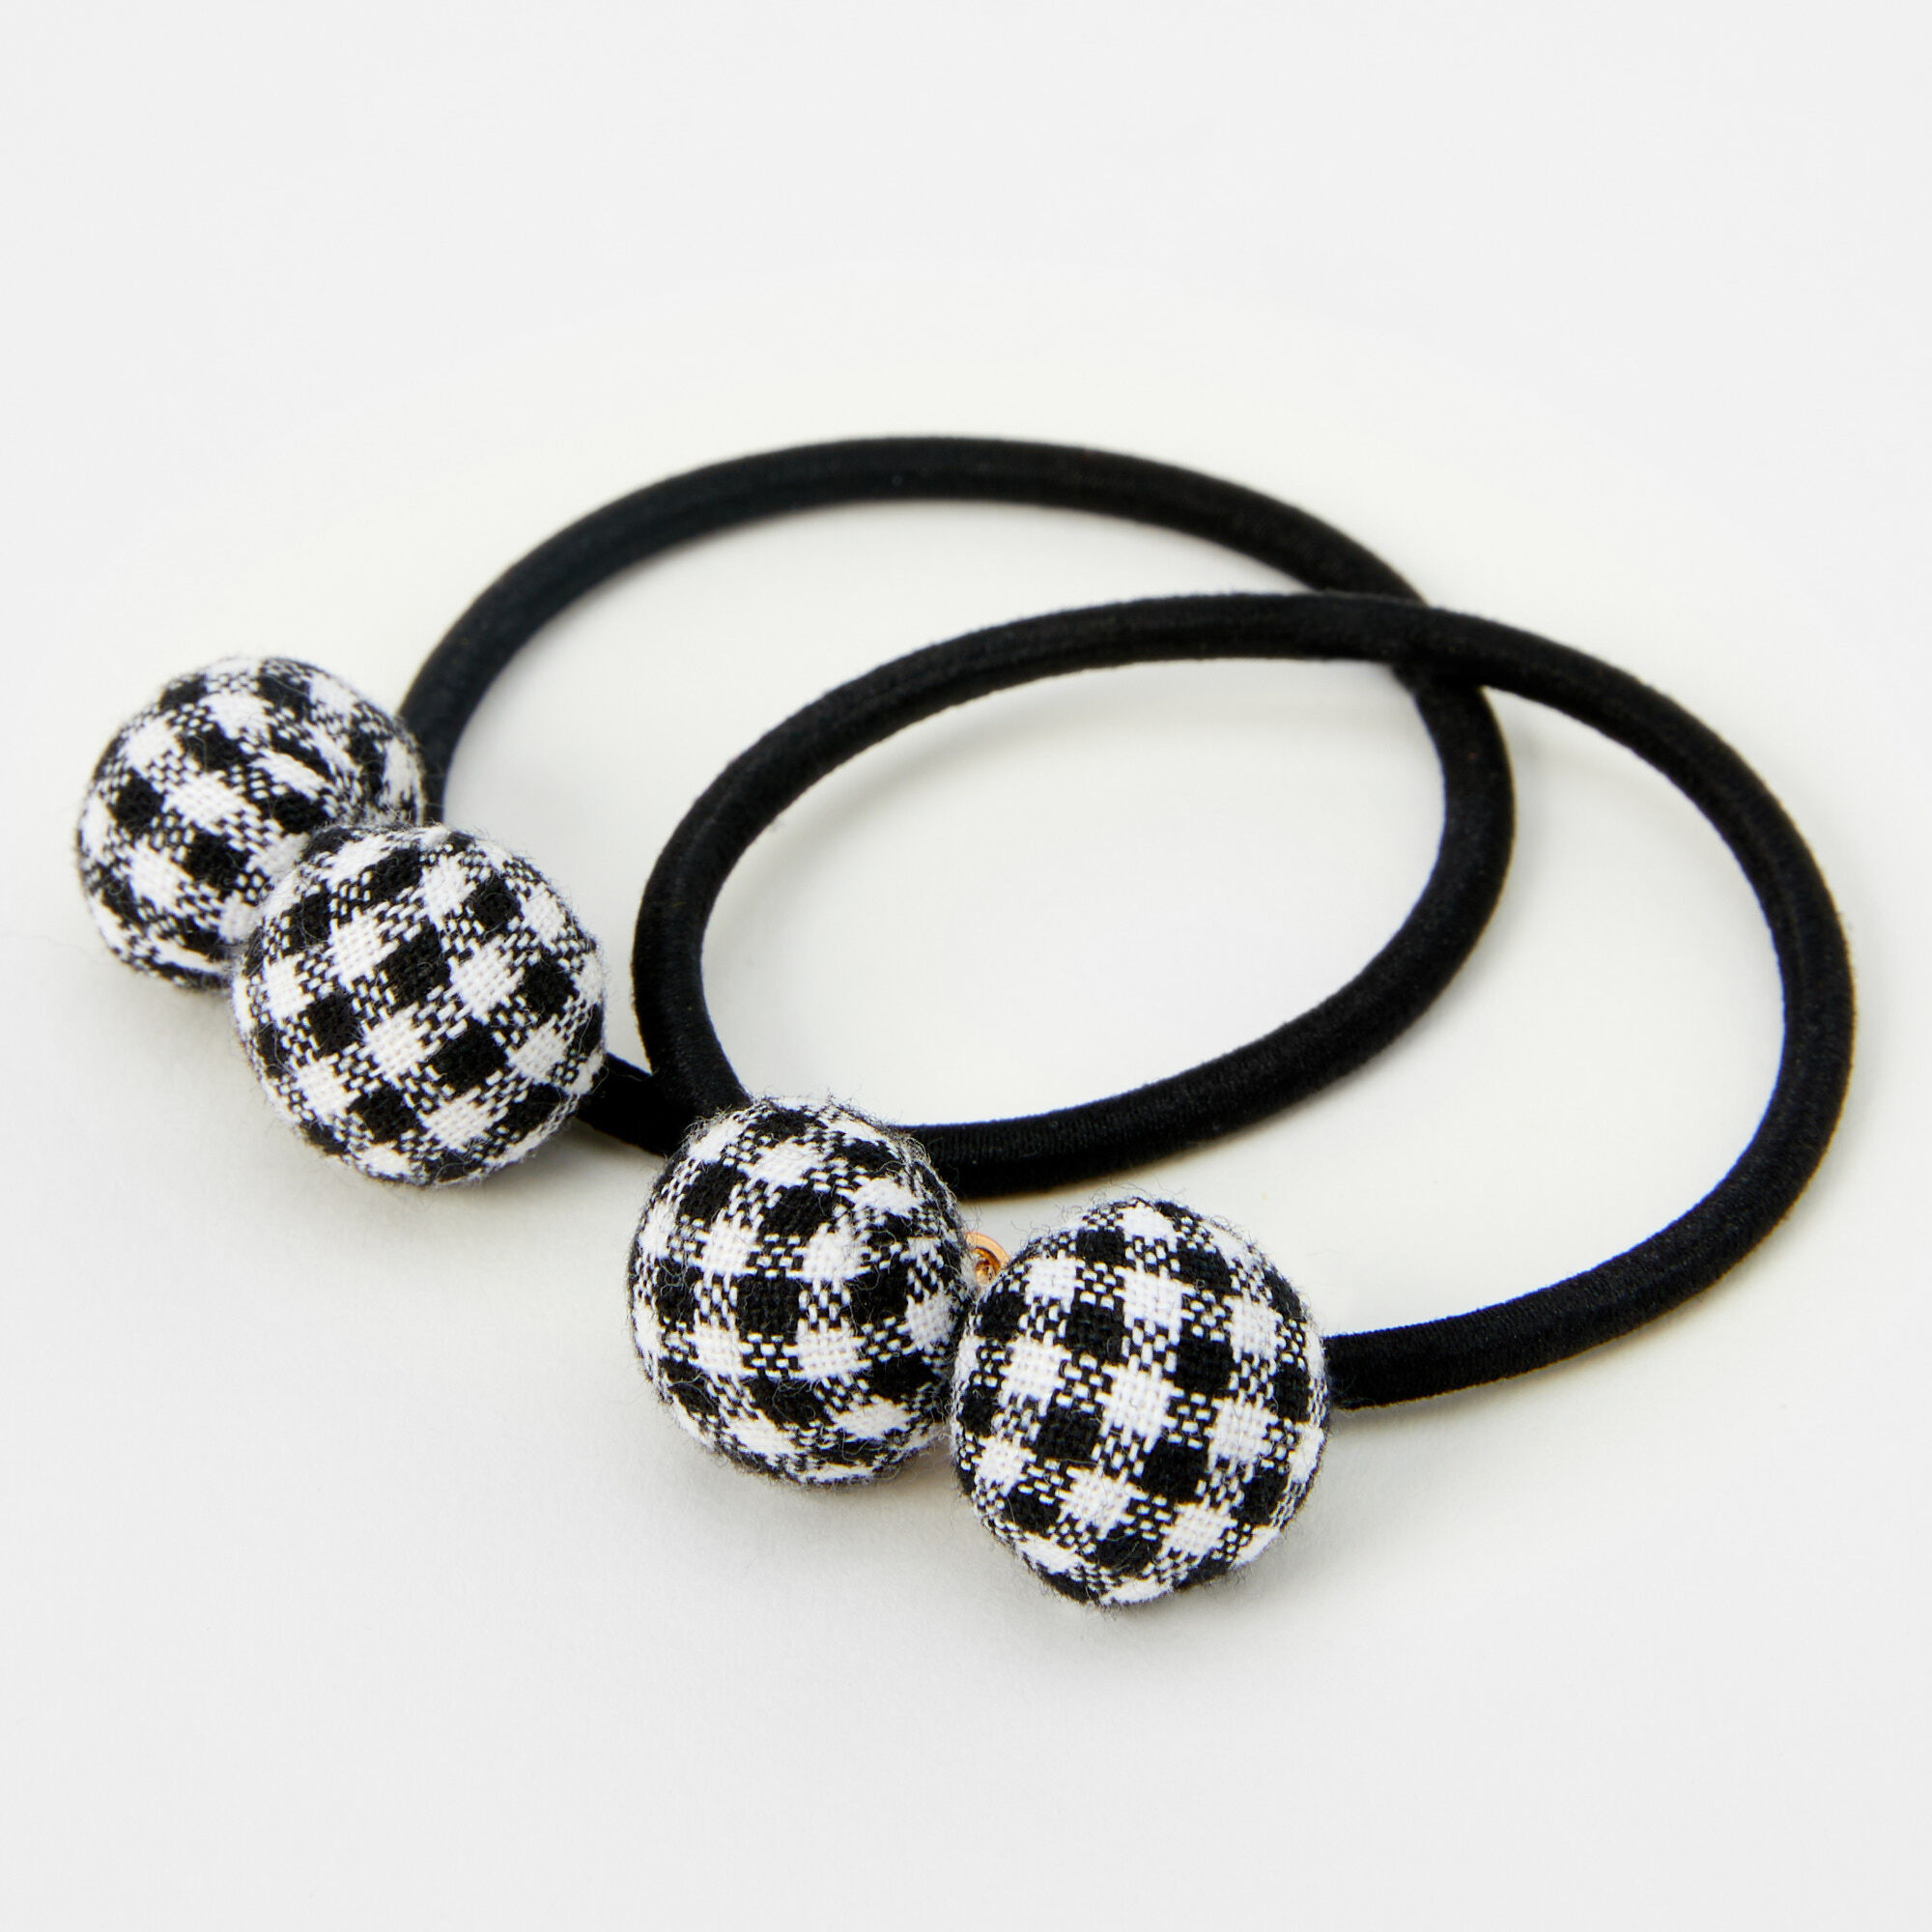 View Claires Plaid Beaded Hair Ties 2 Pack Black information